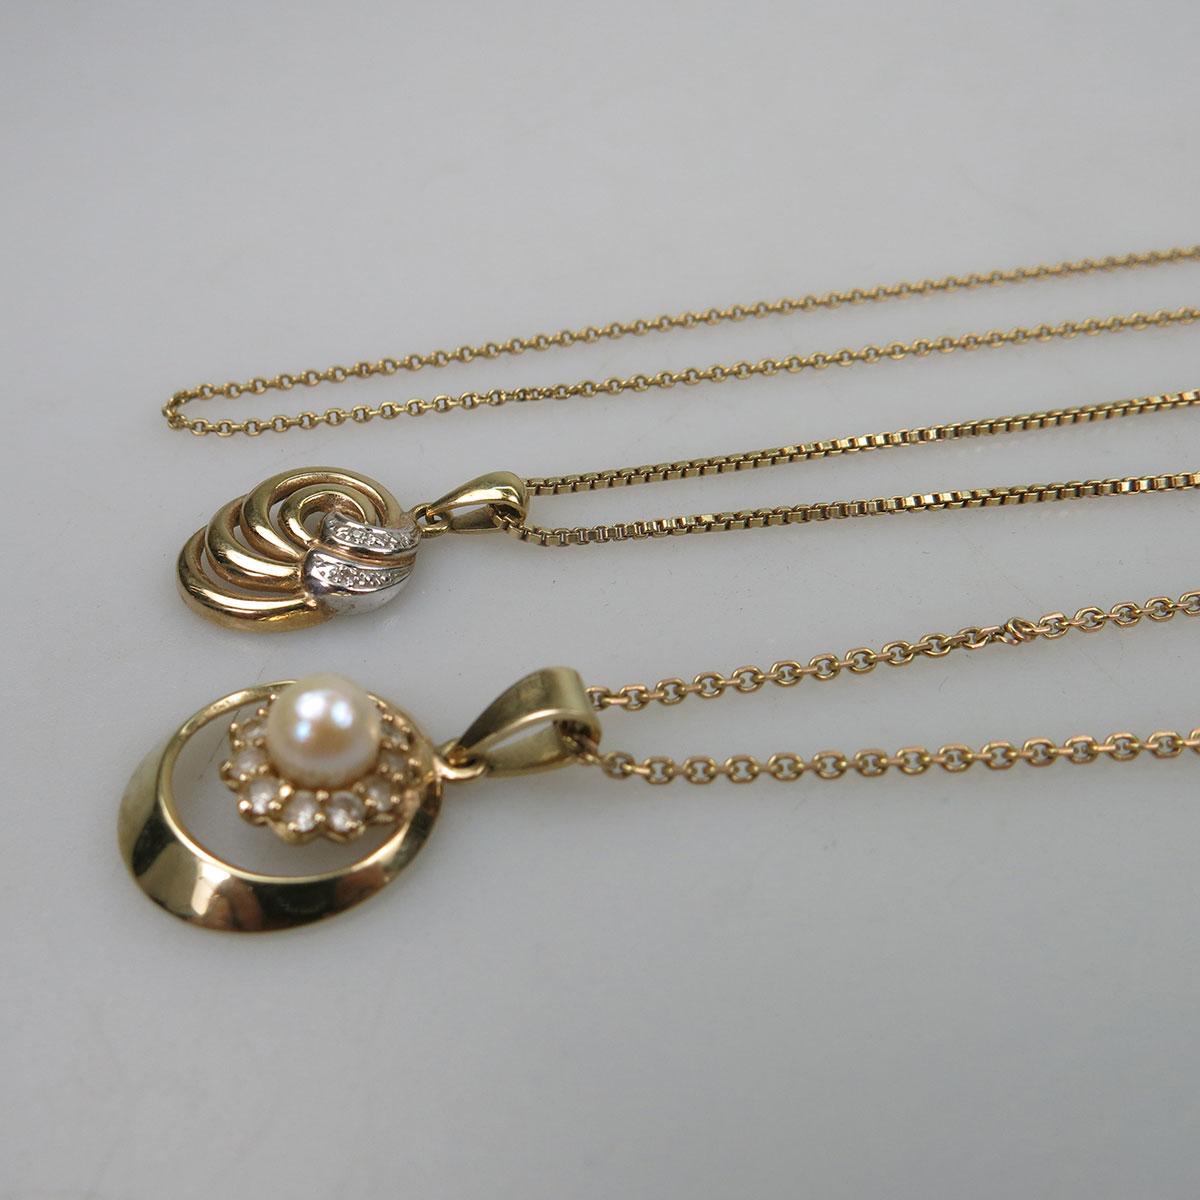 3 x 14k Yellow Gold Chains